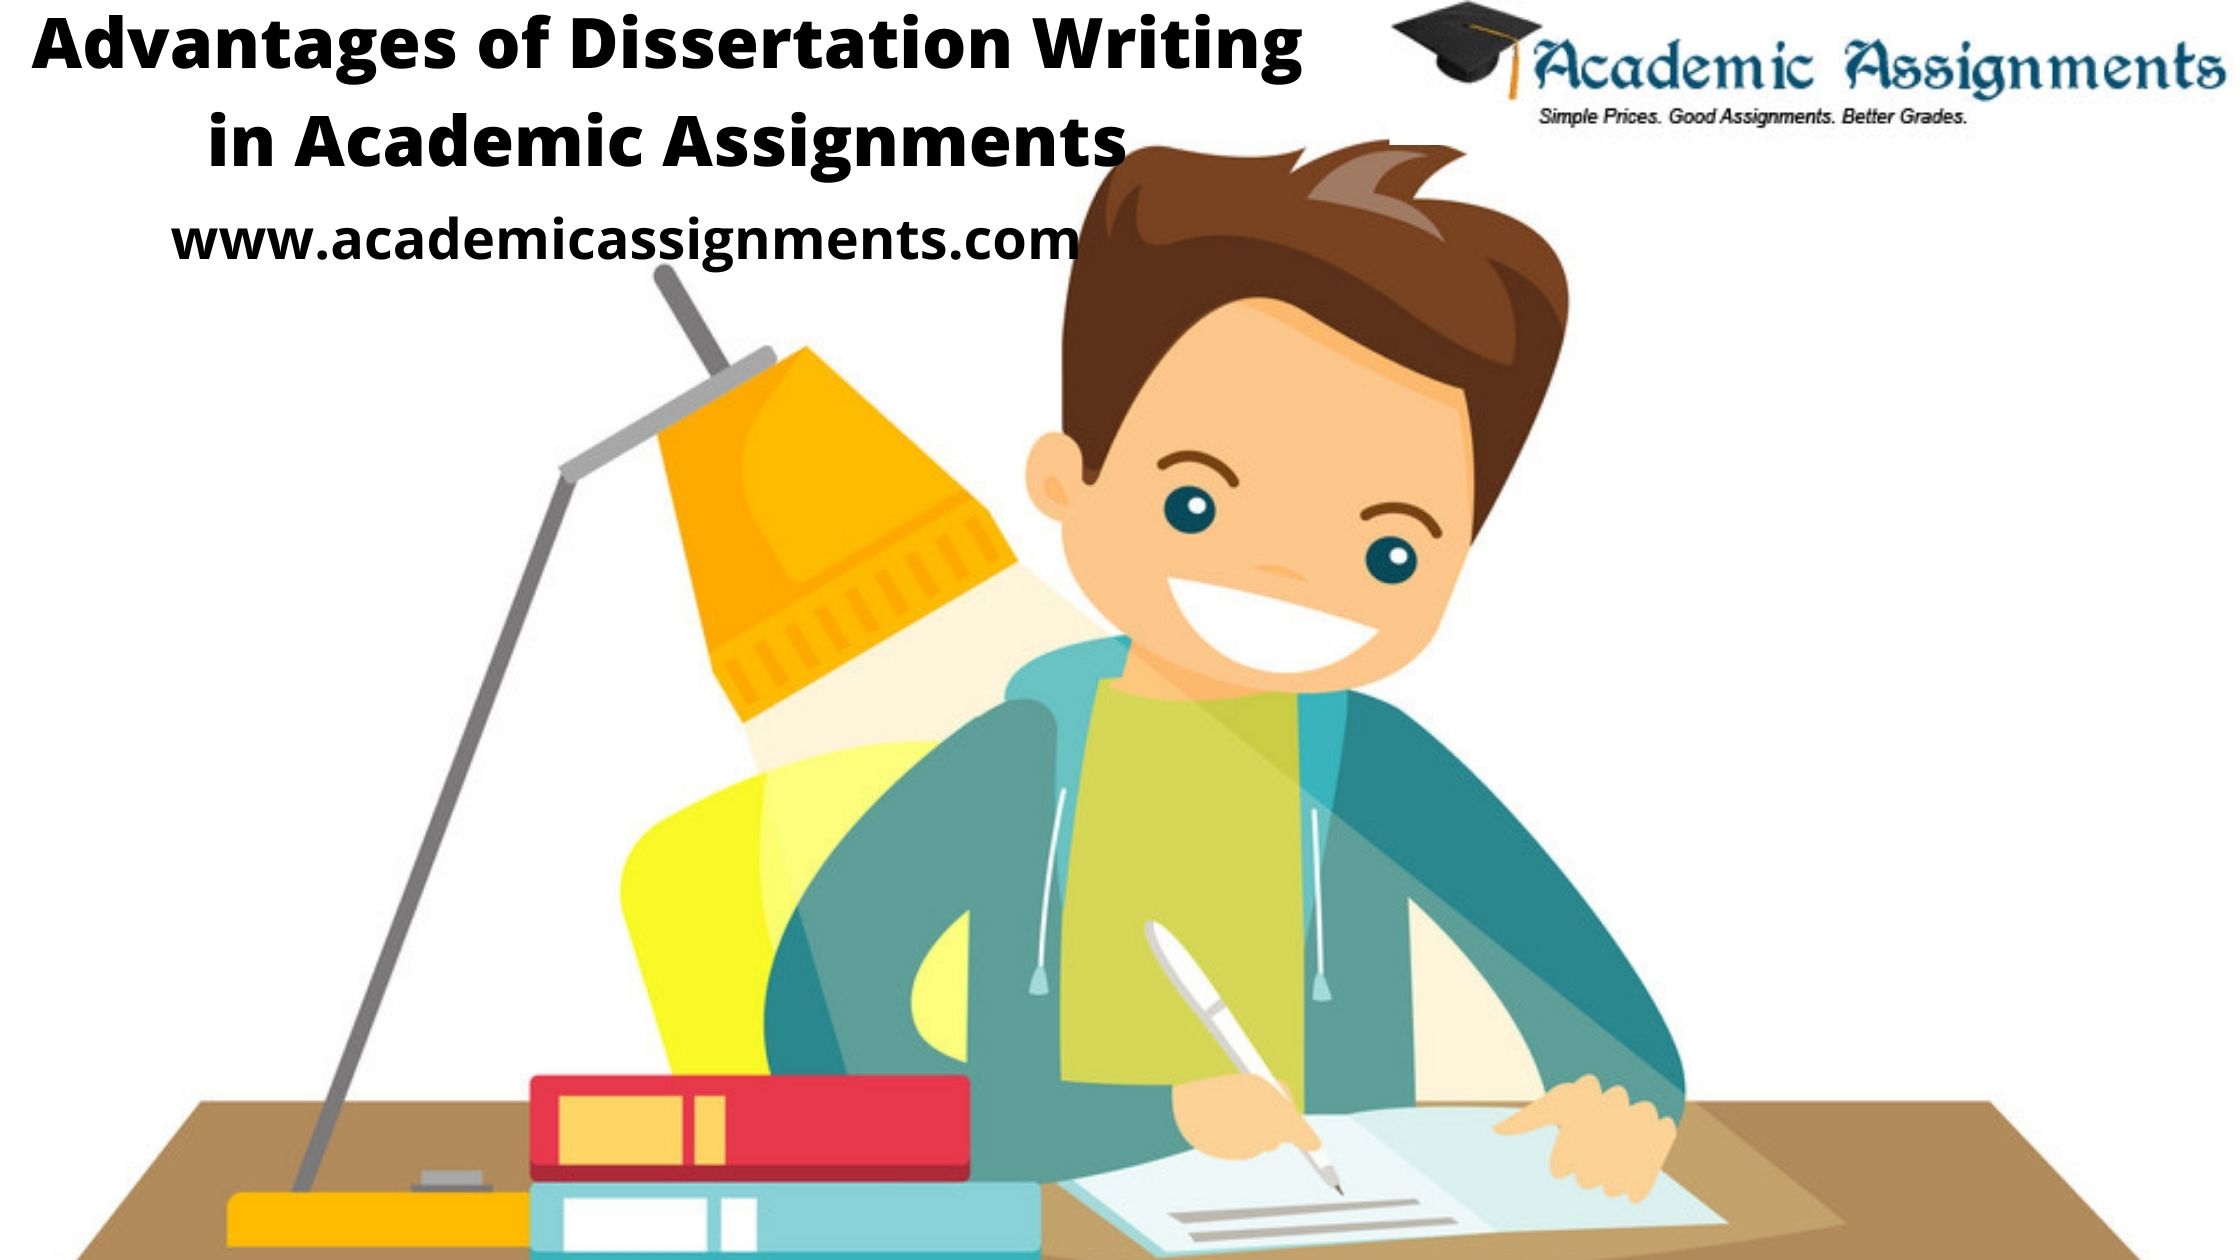 Advantages of Dissertation Writing in Academic Assignments